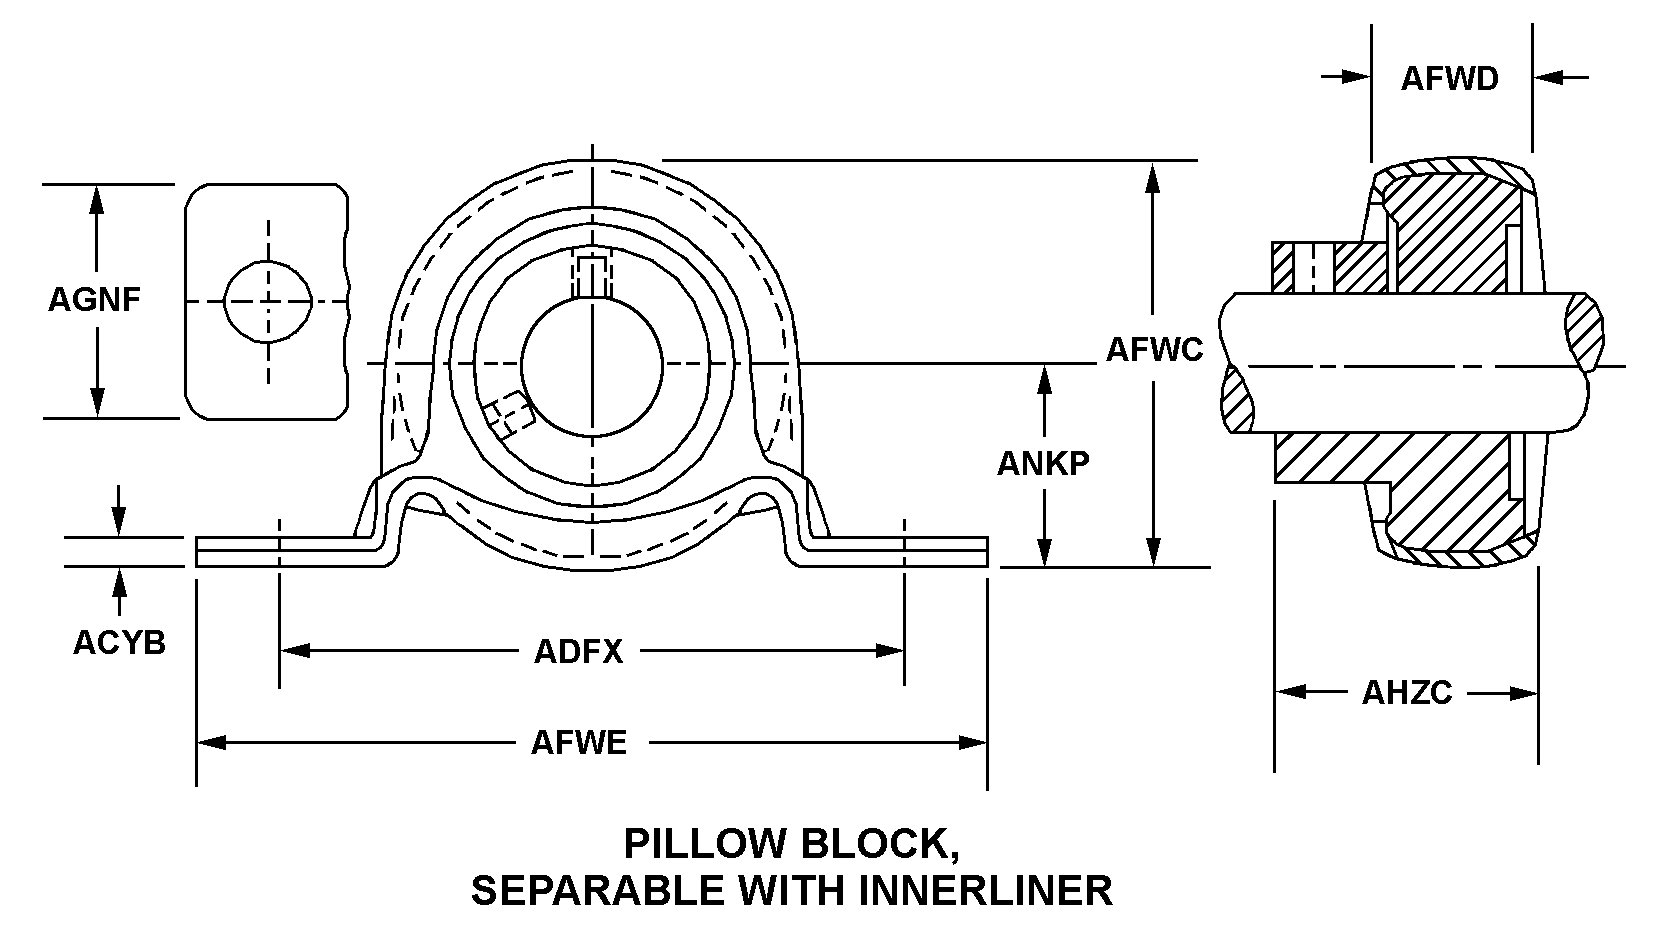 PILLOW BLOCK, SEPARABLE WITH INNERLINER style nsn 3130-01-009-7002